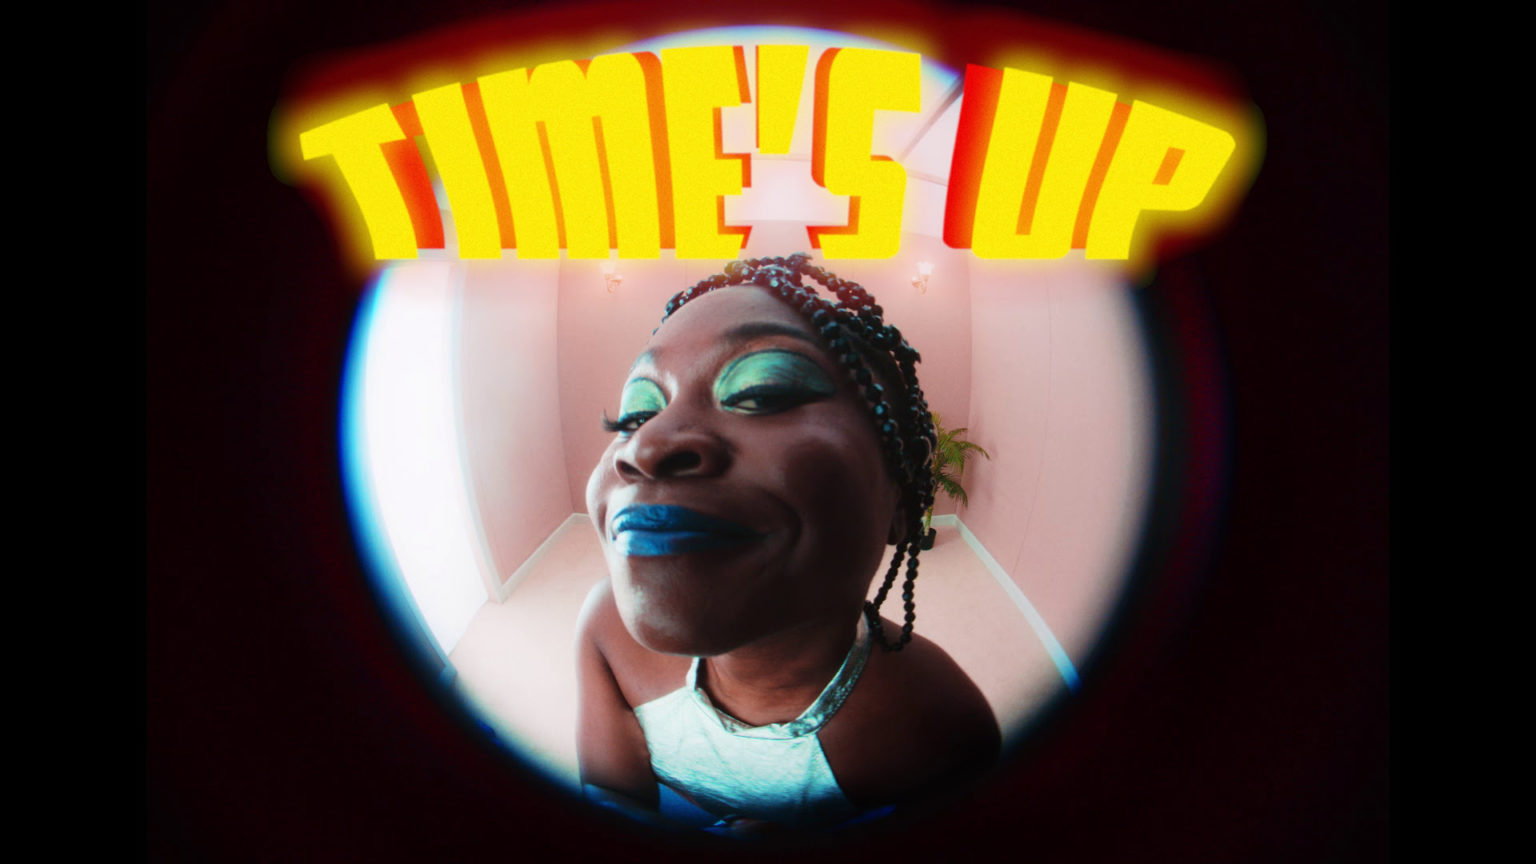 Sampa The Great has partnered with Sanjay De Silva (director of ‘The Return - A Short Film’, ‘Final Form’) for a new video entitled "Times Up"